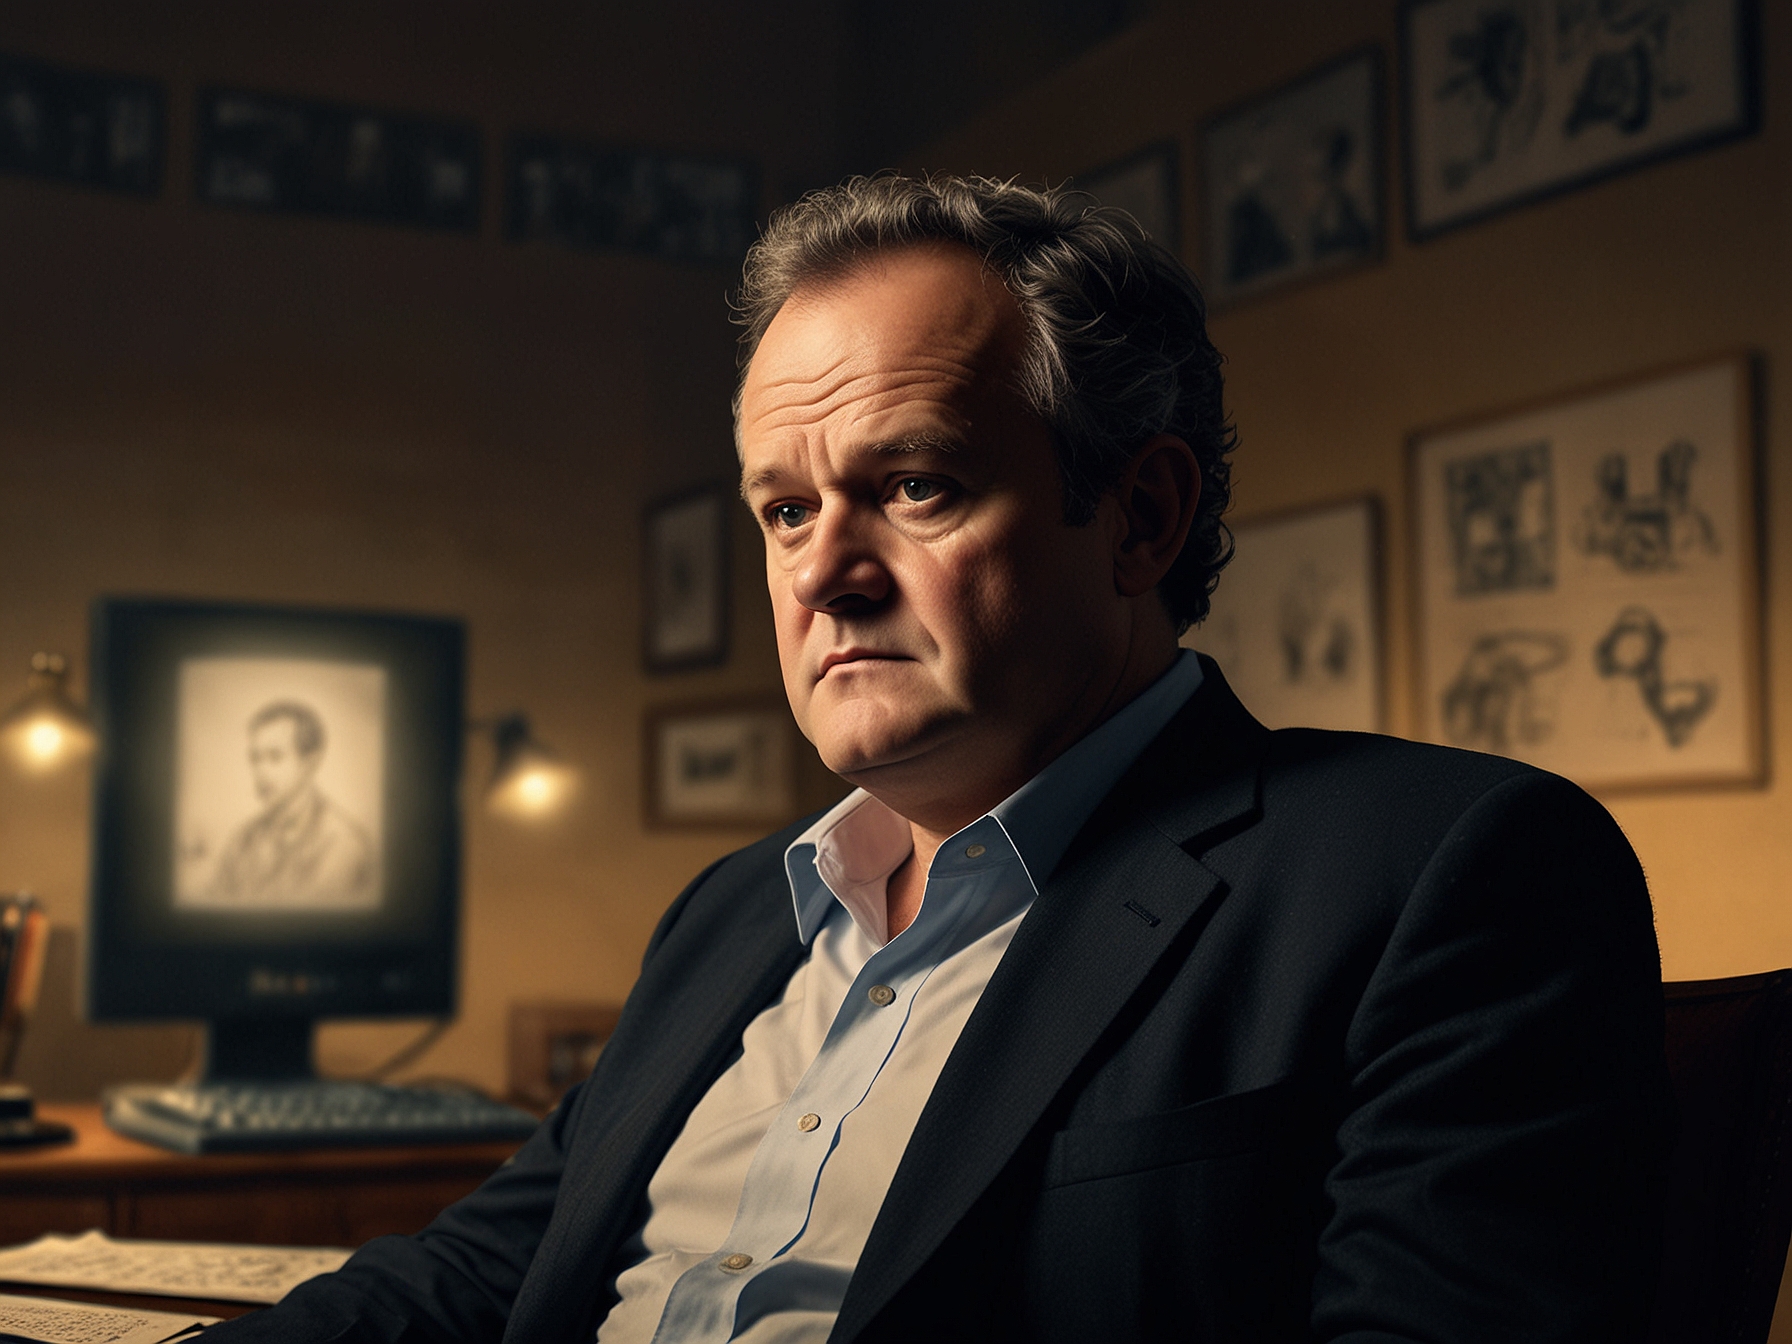 A despondent Hugh Bonneville as Douglas, sitting in a dimly lit room surrounded by the glow of mobile screens, representing the pervasive influence of social media and public scrutiny.